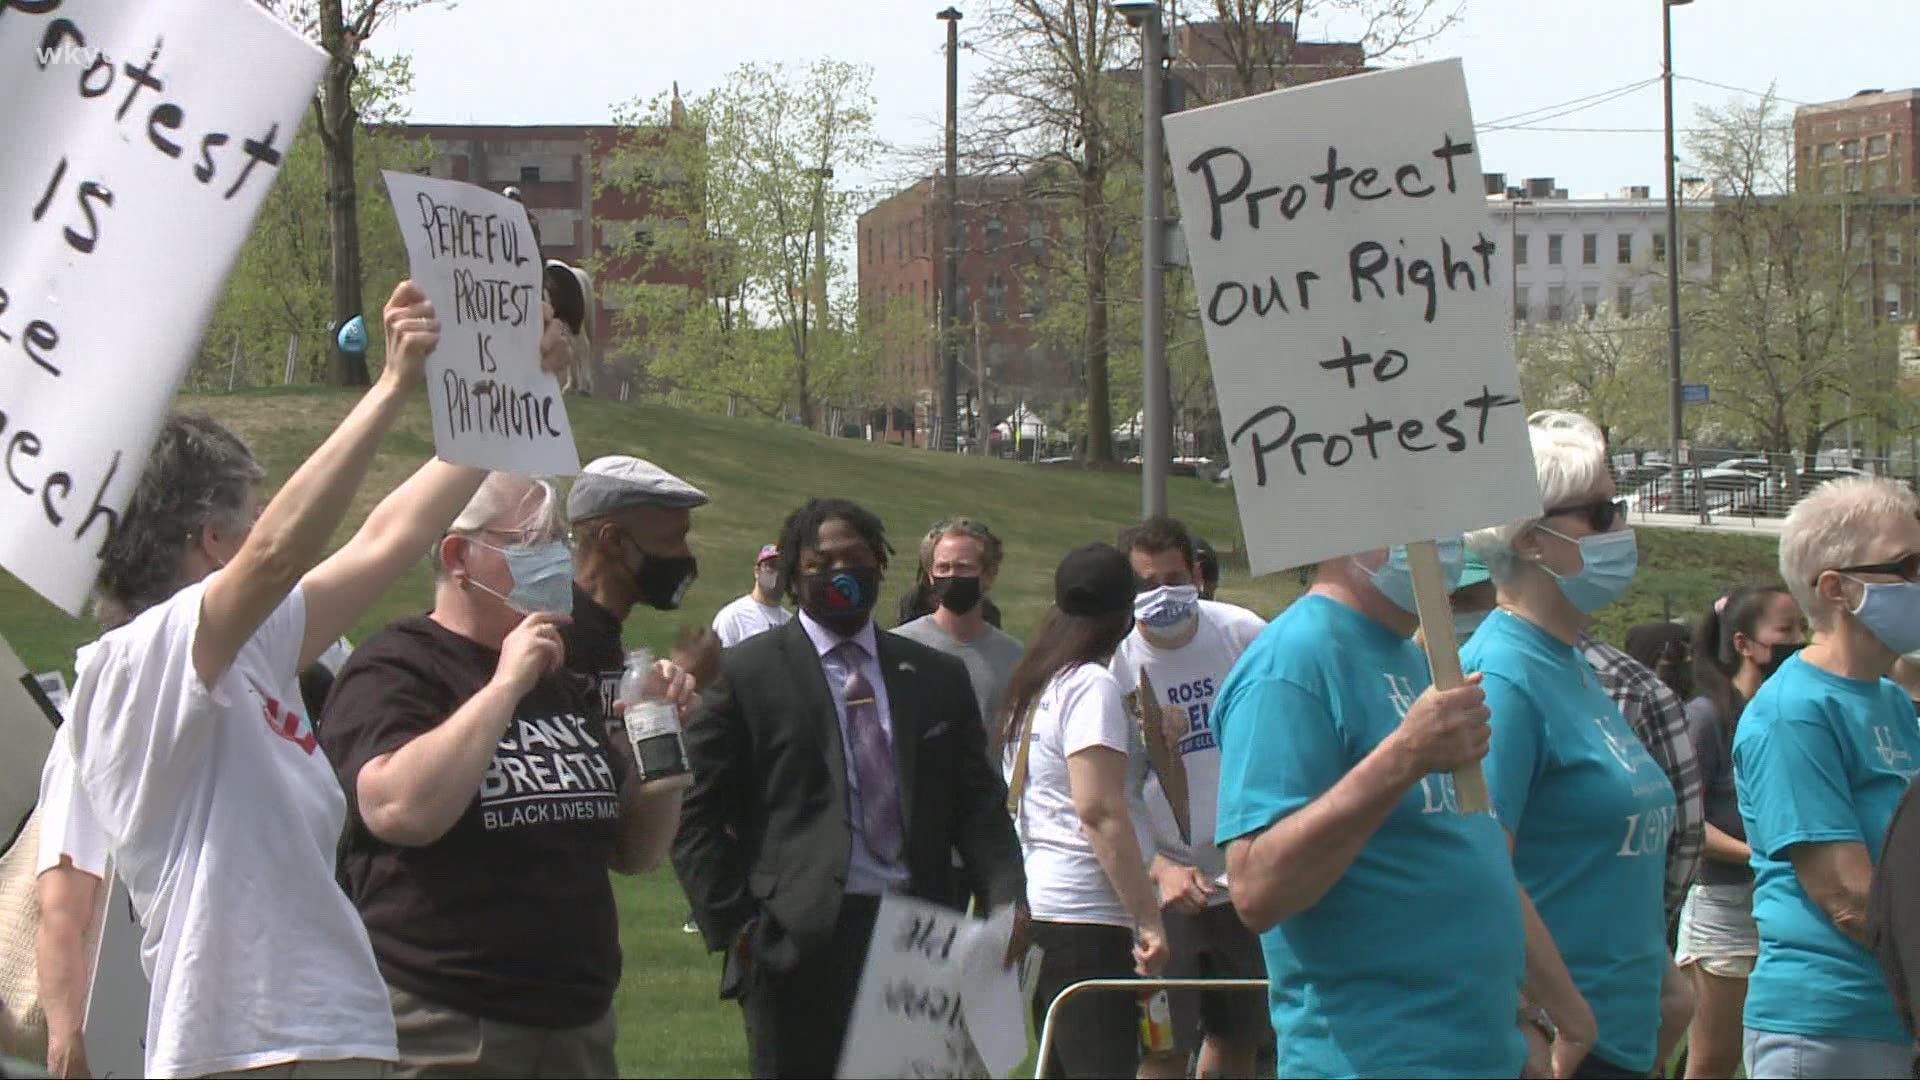 The groups feel proposals in the Ohio legislature would curb First Amendment rights, while supporters say such measures are needed to to keep protests under control.